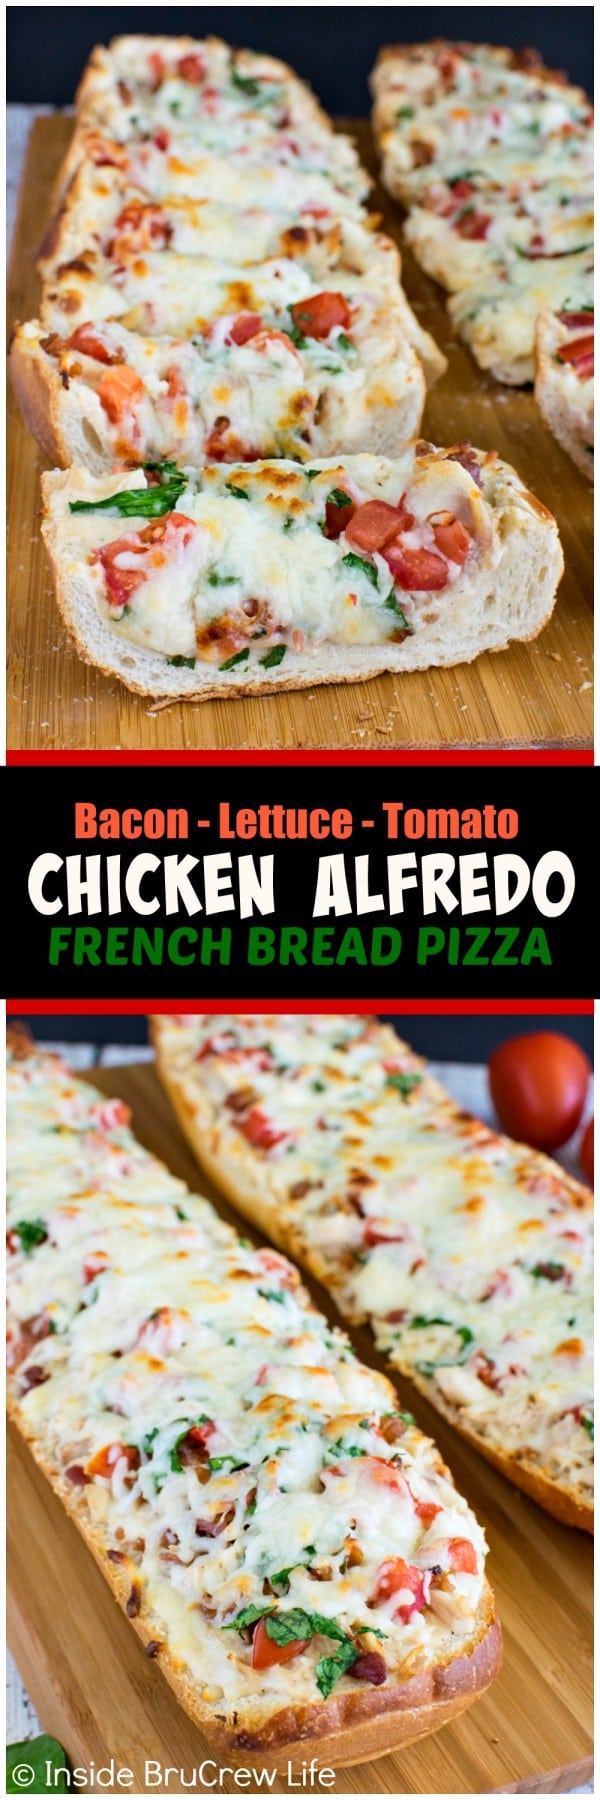 BLT Chicken Alfredo French Bread Pizza - this easy pizza is loaded with meat, veggies, and cheese. Awesome dinner recipe for busy nights!